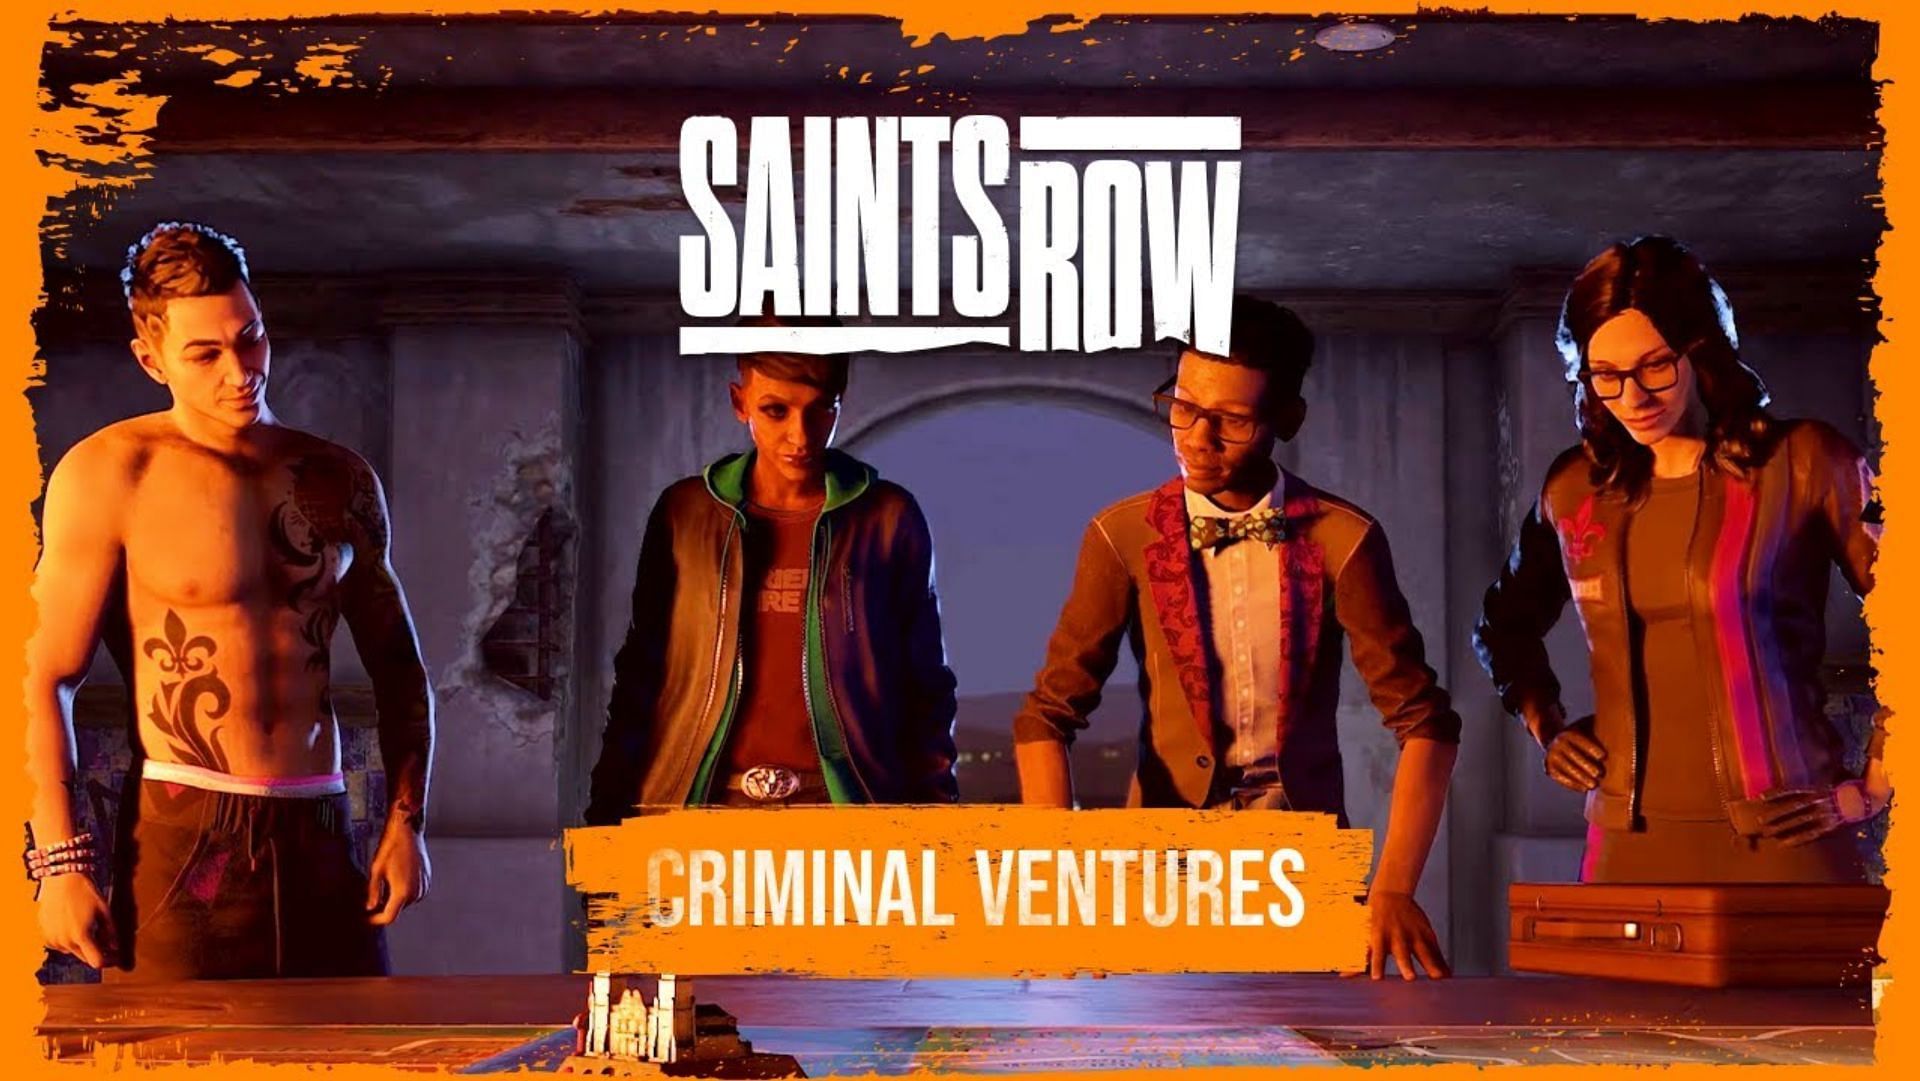 Criminal Ventures are one of the most engaging side content in Saints Row (Image via Volition)